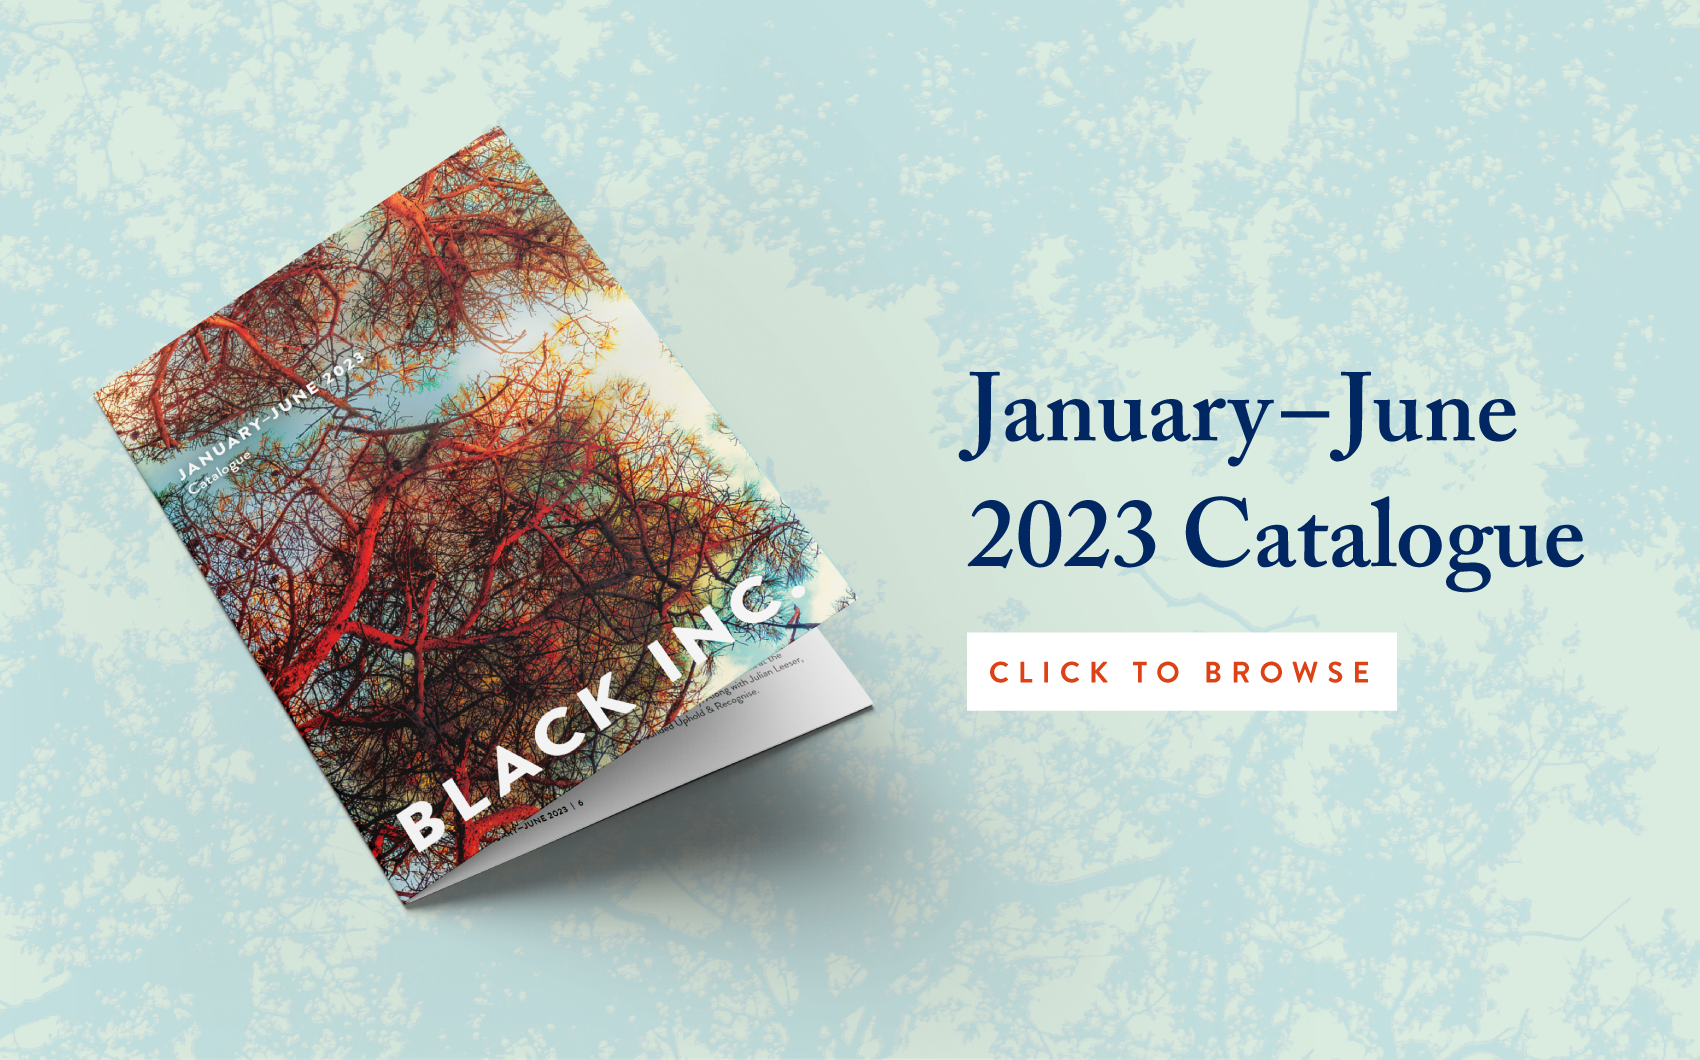 January–June Catalogue Now Available